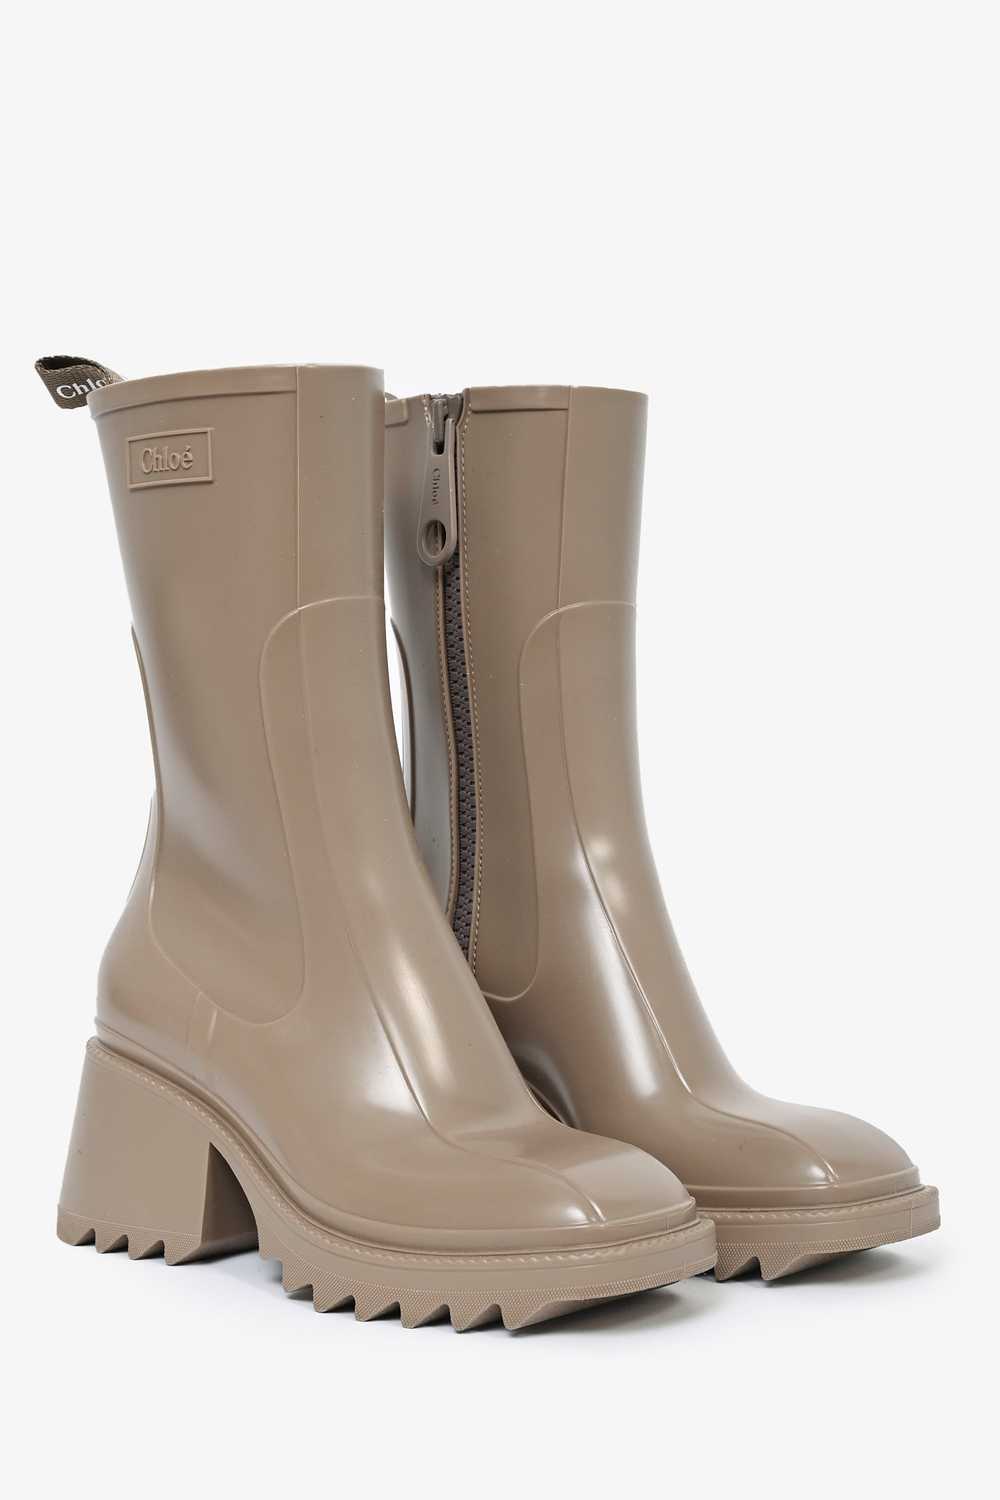 Chloe Taupe Zip Up 'Betty' Rain Boots Size 35 - image 2